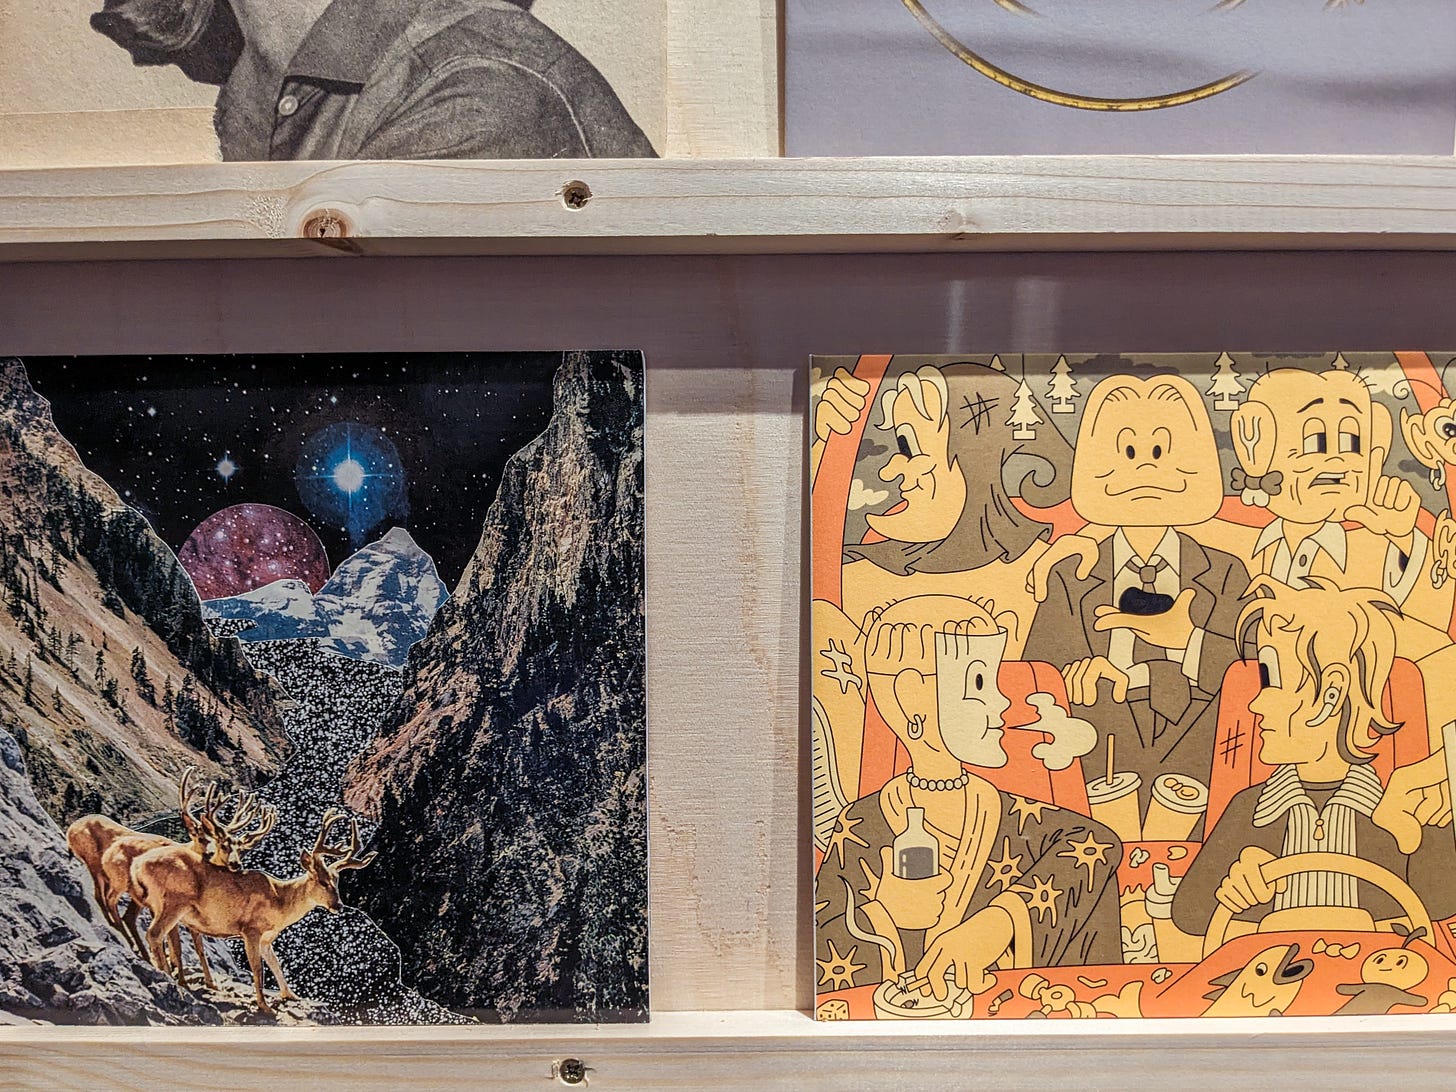 Two sample Secret 7" covers. One is a collage of two deer on mountains while seemingly in deep space. The other is a cartoon of five people in a car.